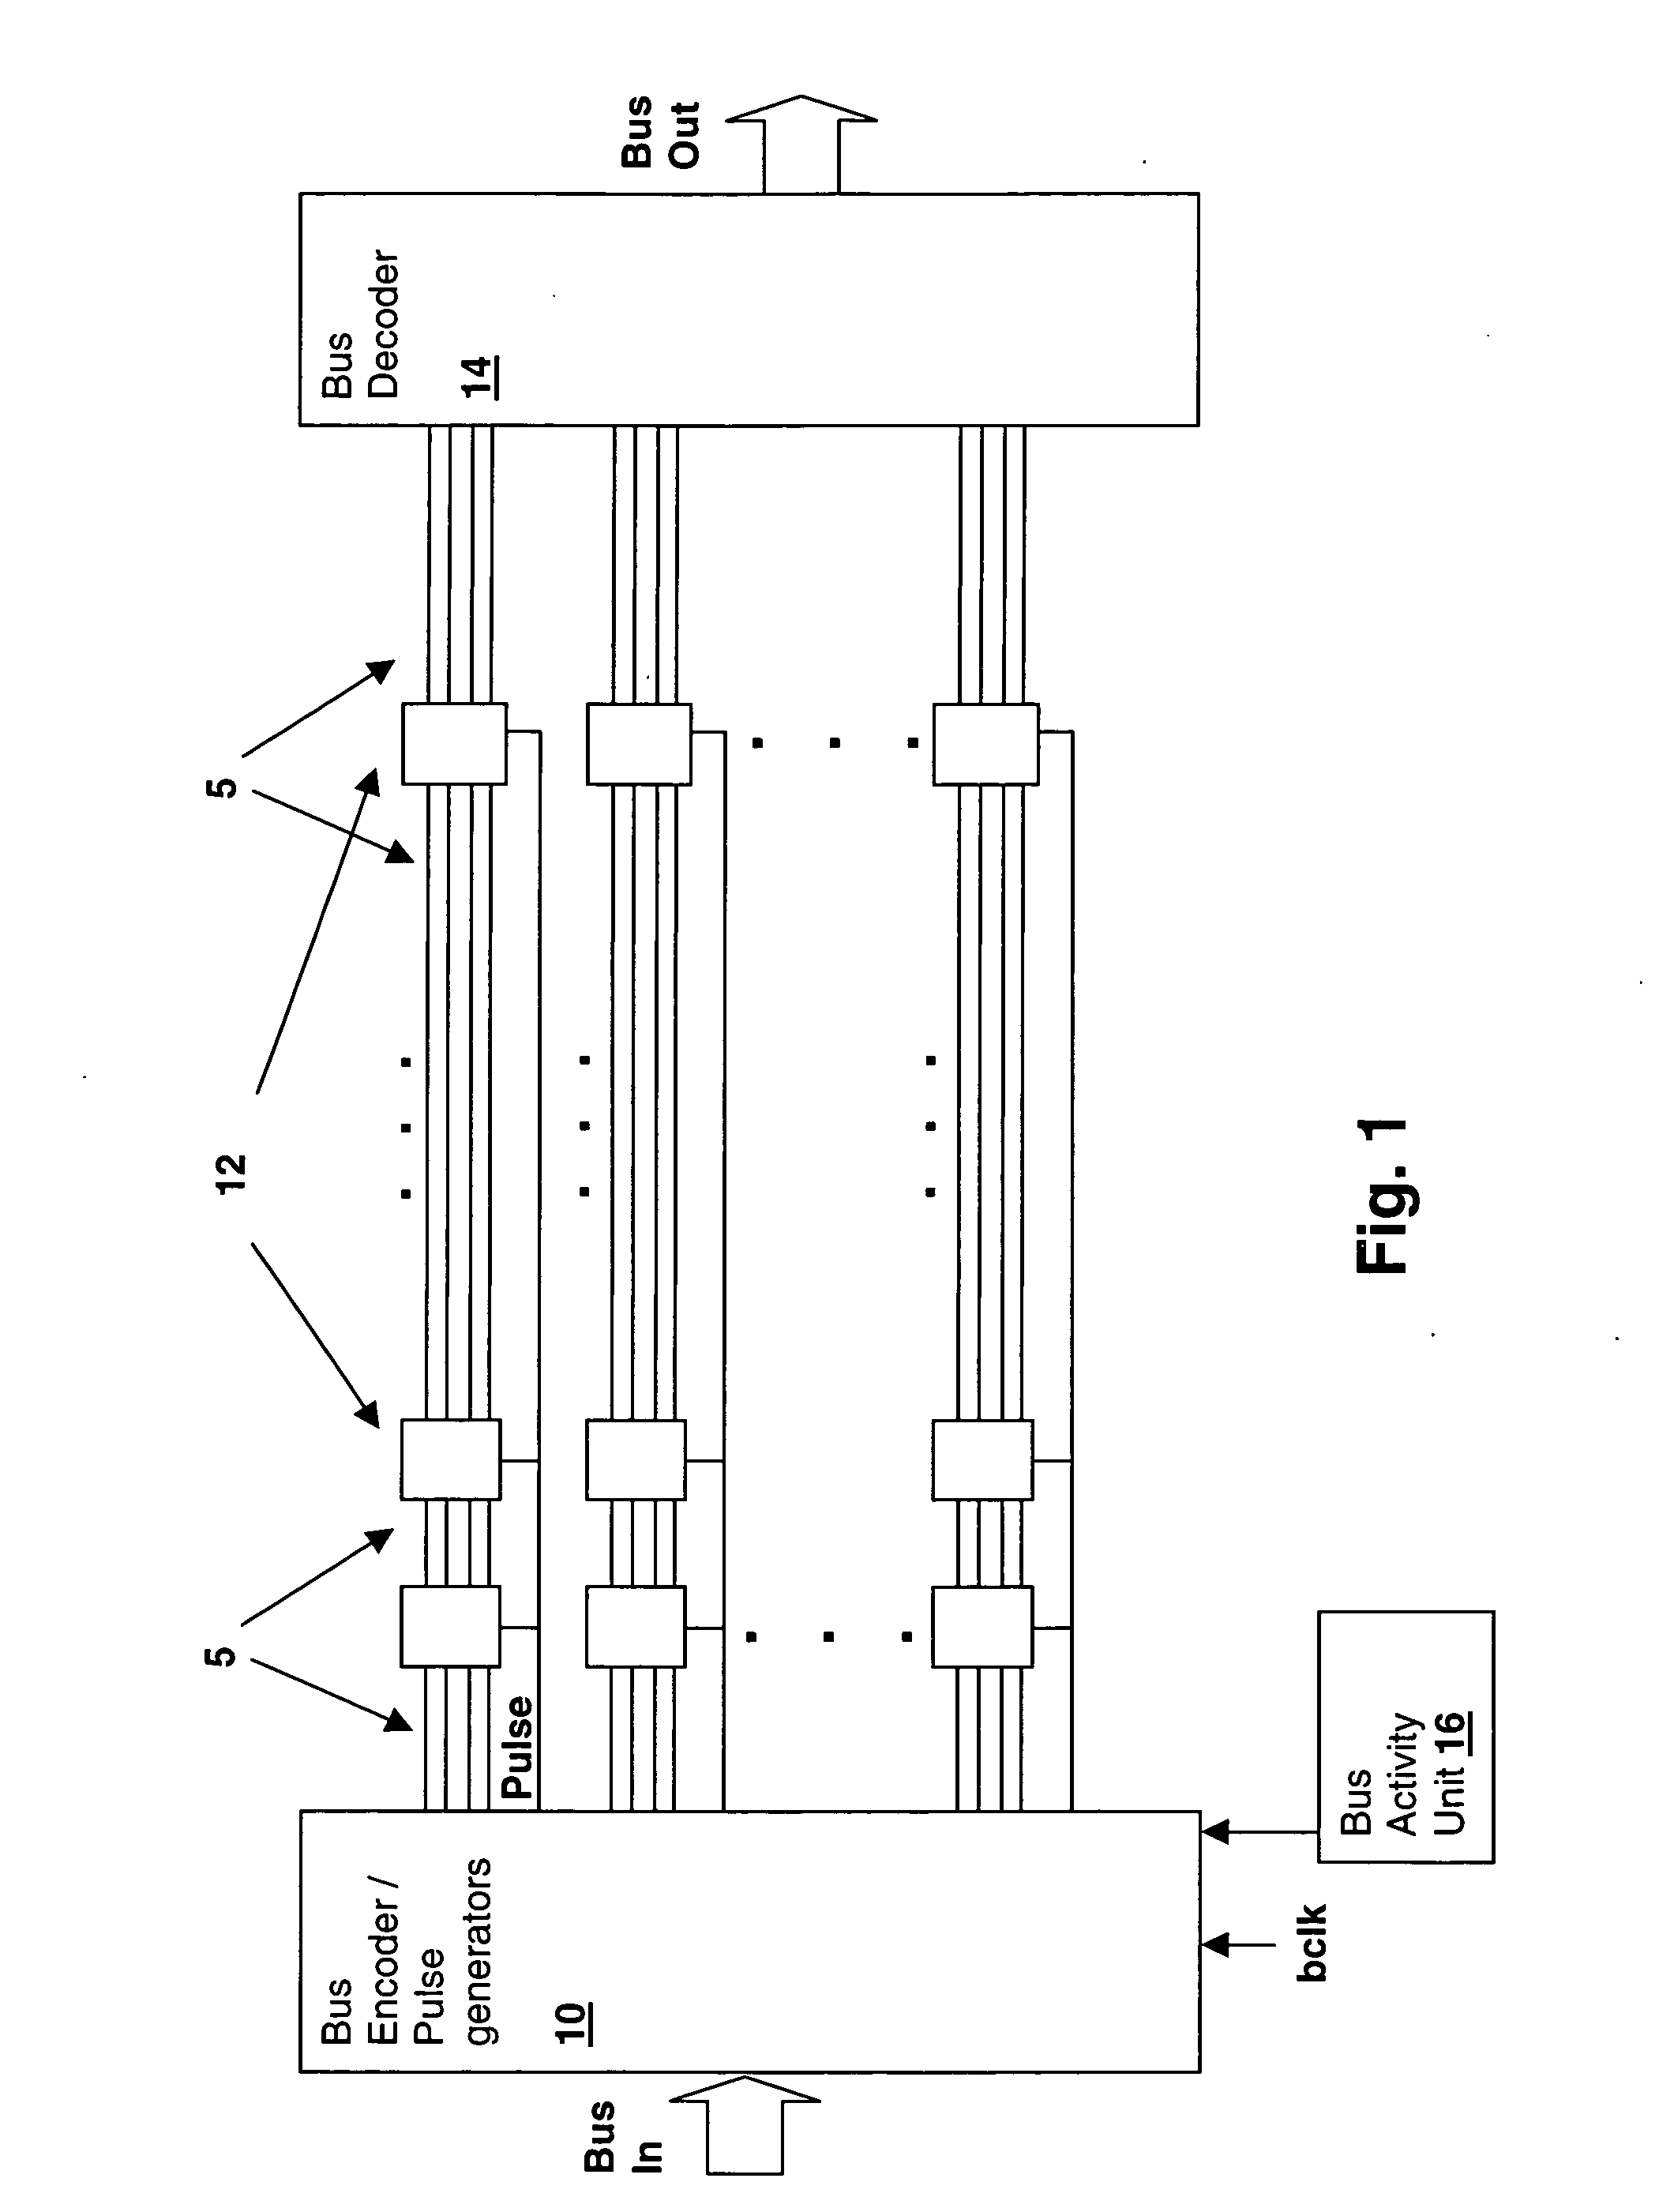 Multi-threshold complementary metal-oxide semiconductor (MTCMOS) bus circuit and method for reducing bus power consumption via pulsed standby switching